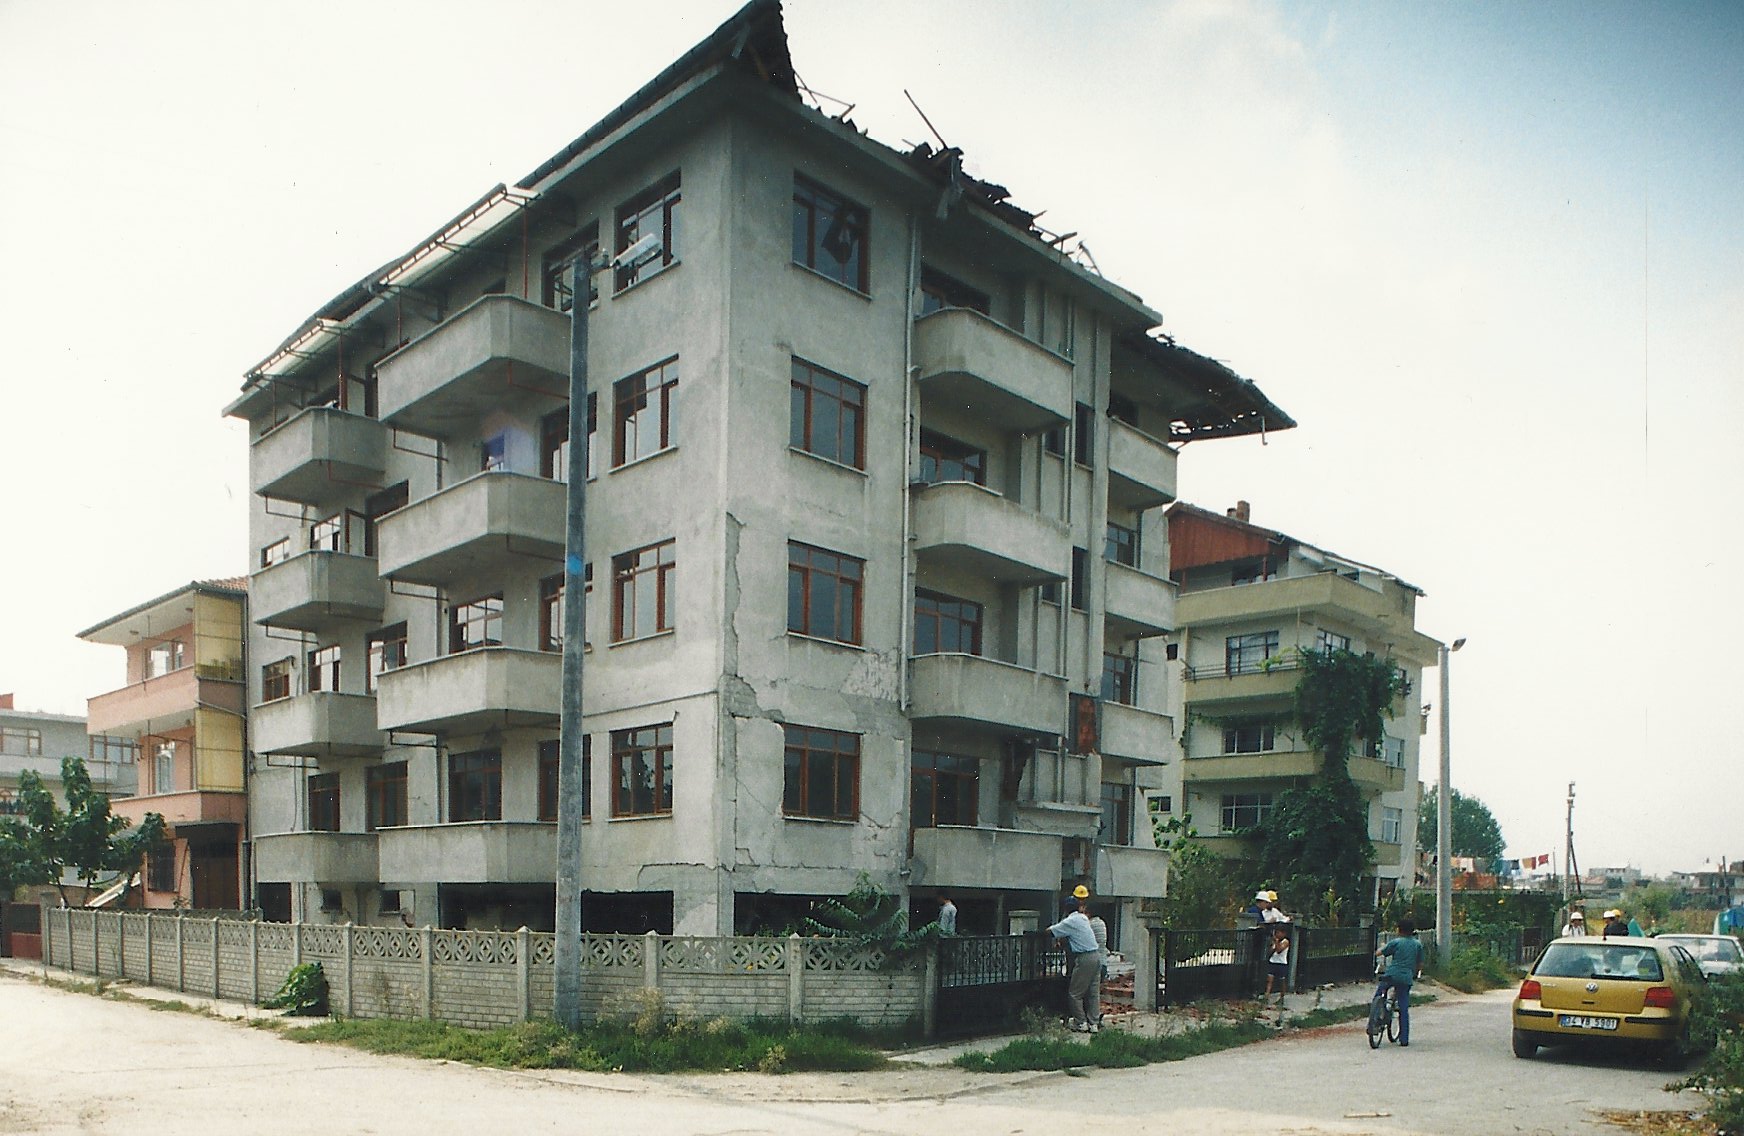 Concrete Buildings Damaged in Earthquakes